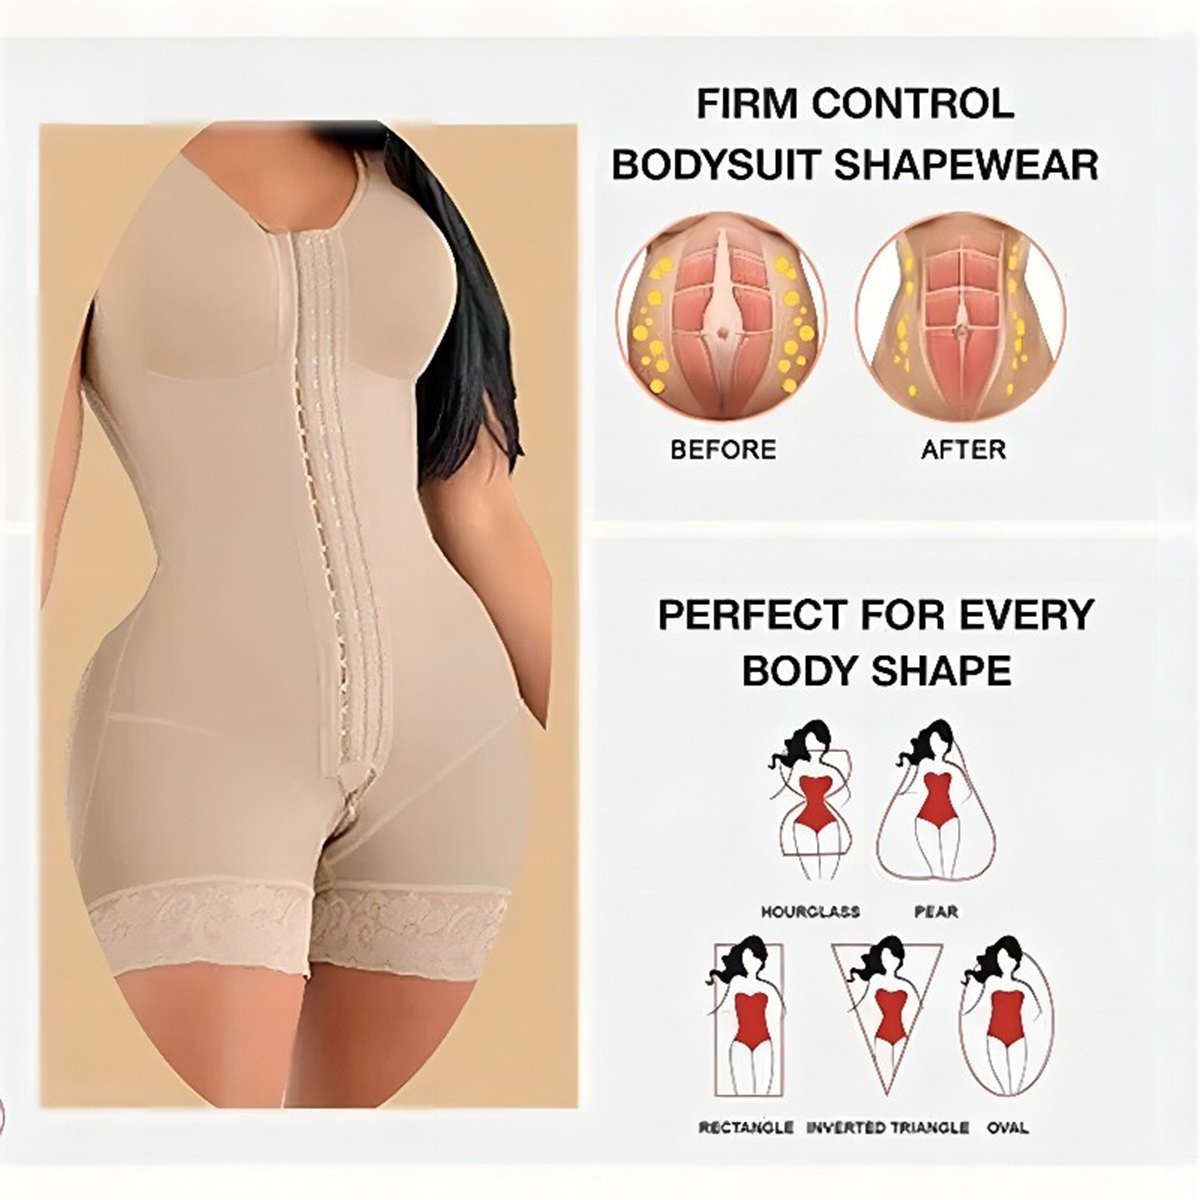 Full Body Shapewear with Zipper Closure - Slims, Shapes, and Enhances Figure for a Flawless Look - High-Waisted Tummy Control and Butt Lifting Compression Garment